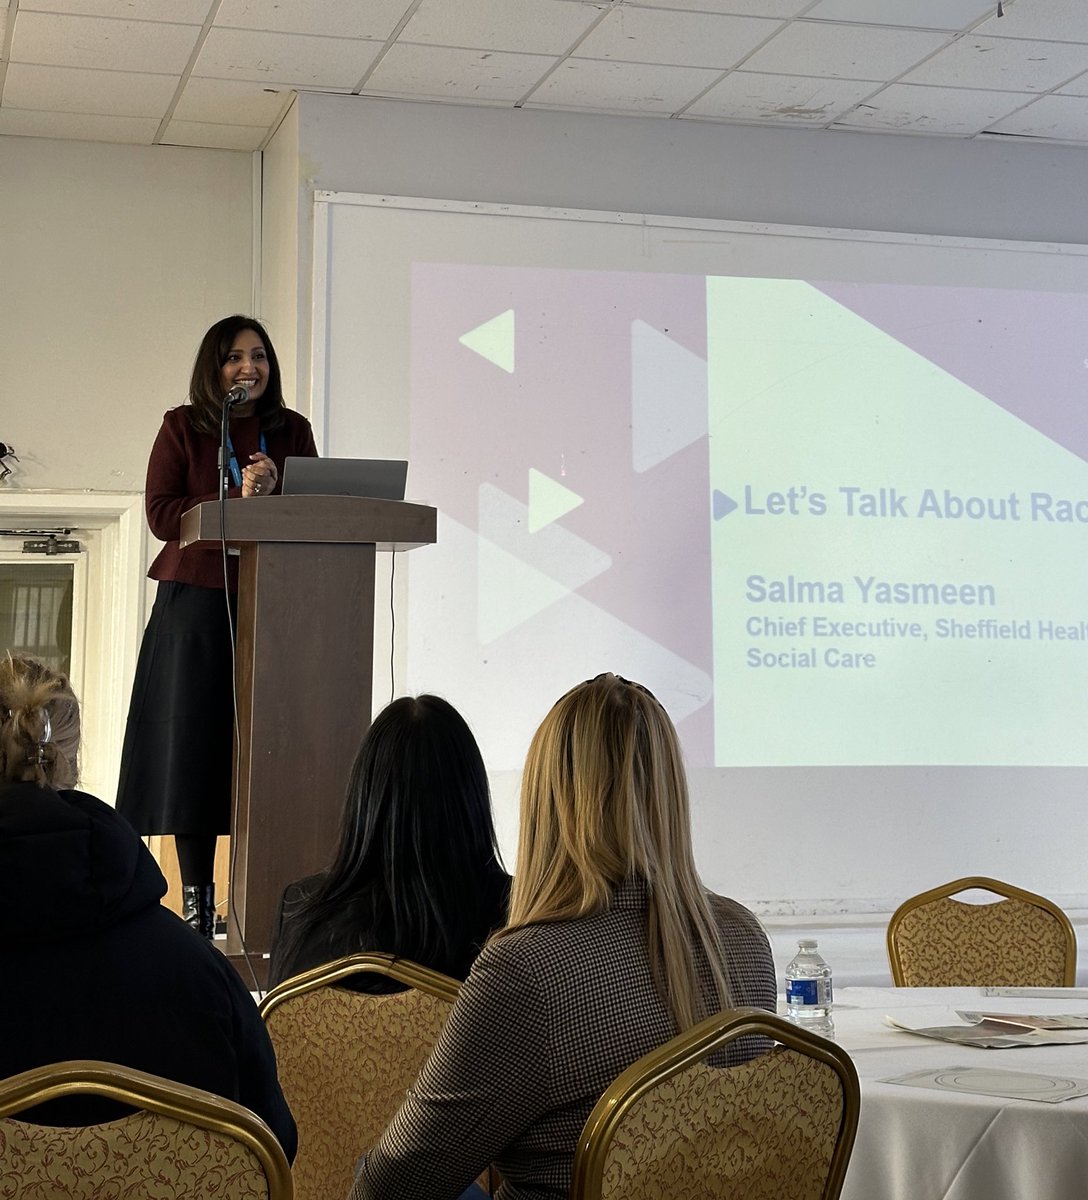 A dynamic convergence of minds at our @SHSCFT 'Let's talk about race' conference! CEO @SalmaYasmeen_1 sets the stage at the ‘Let’s talk about race’ conference. #PCREF